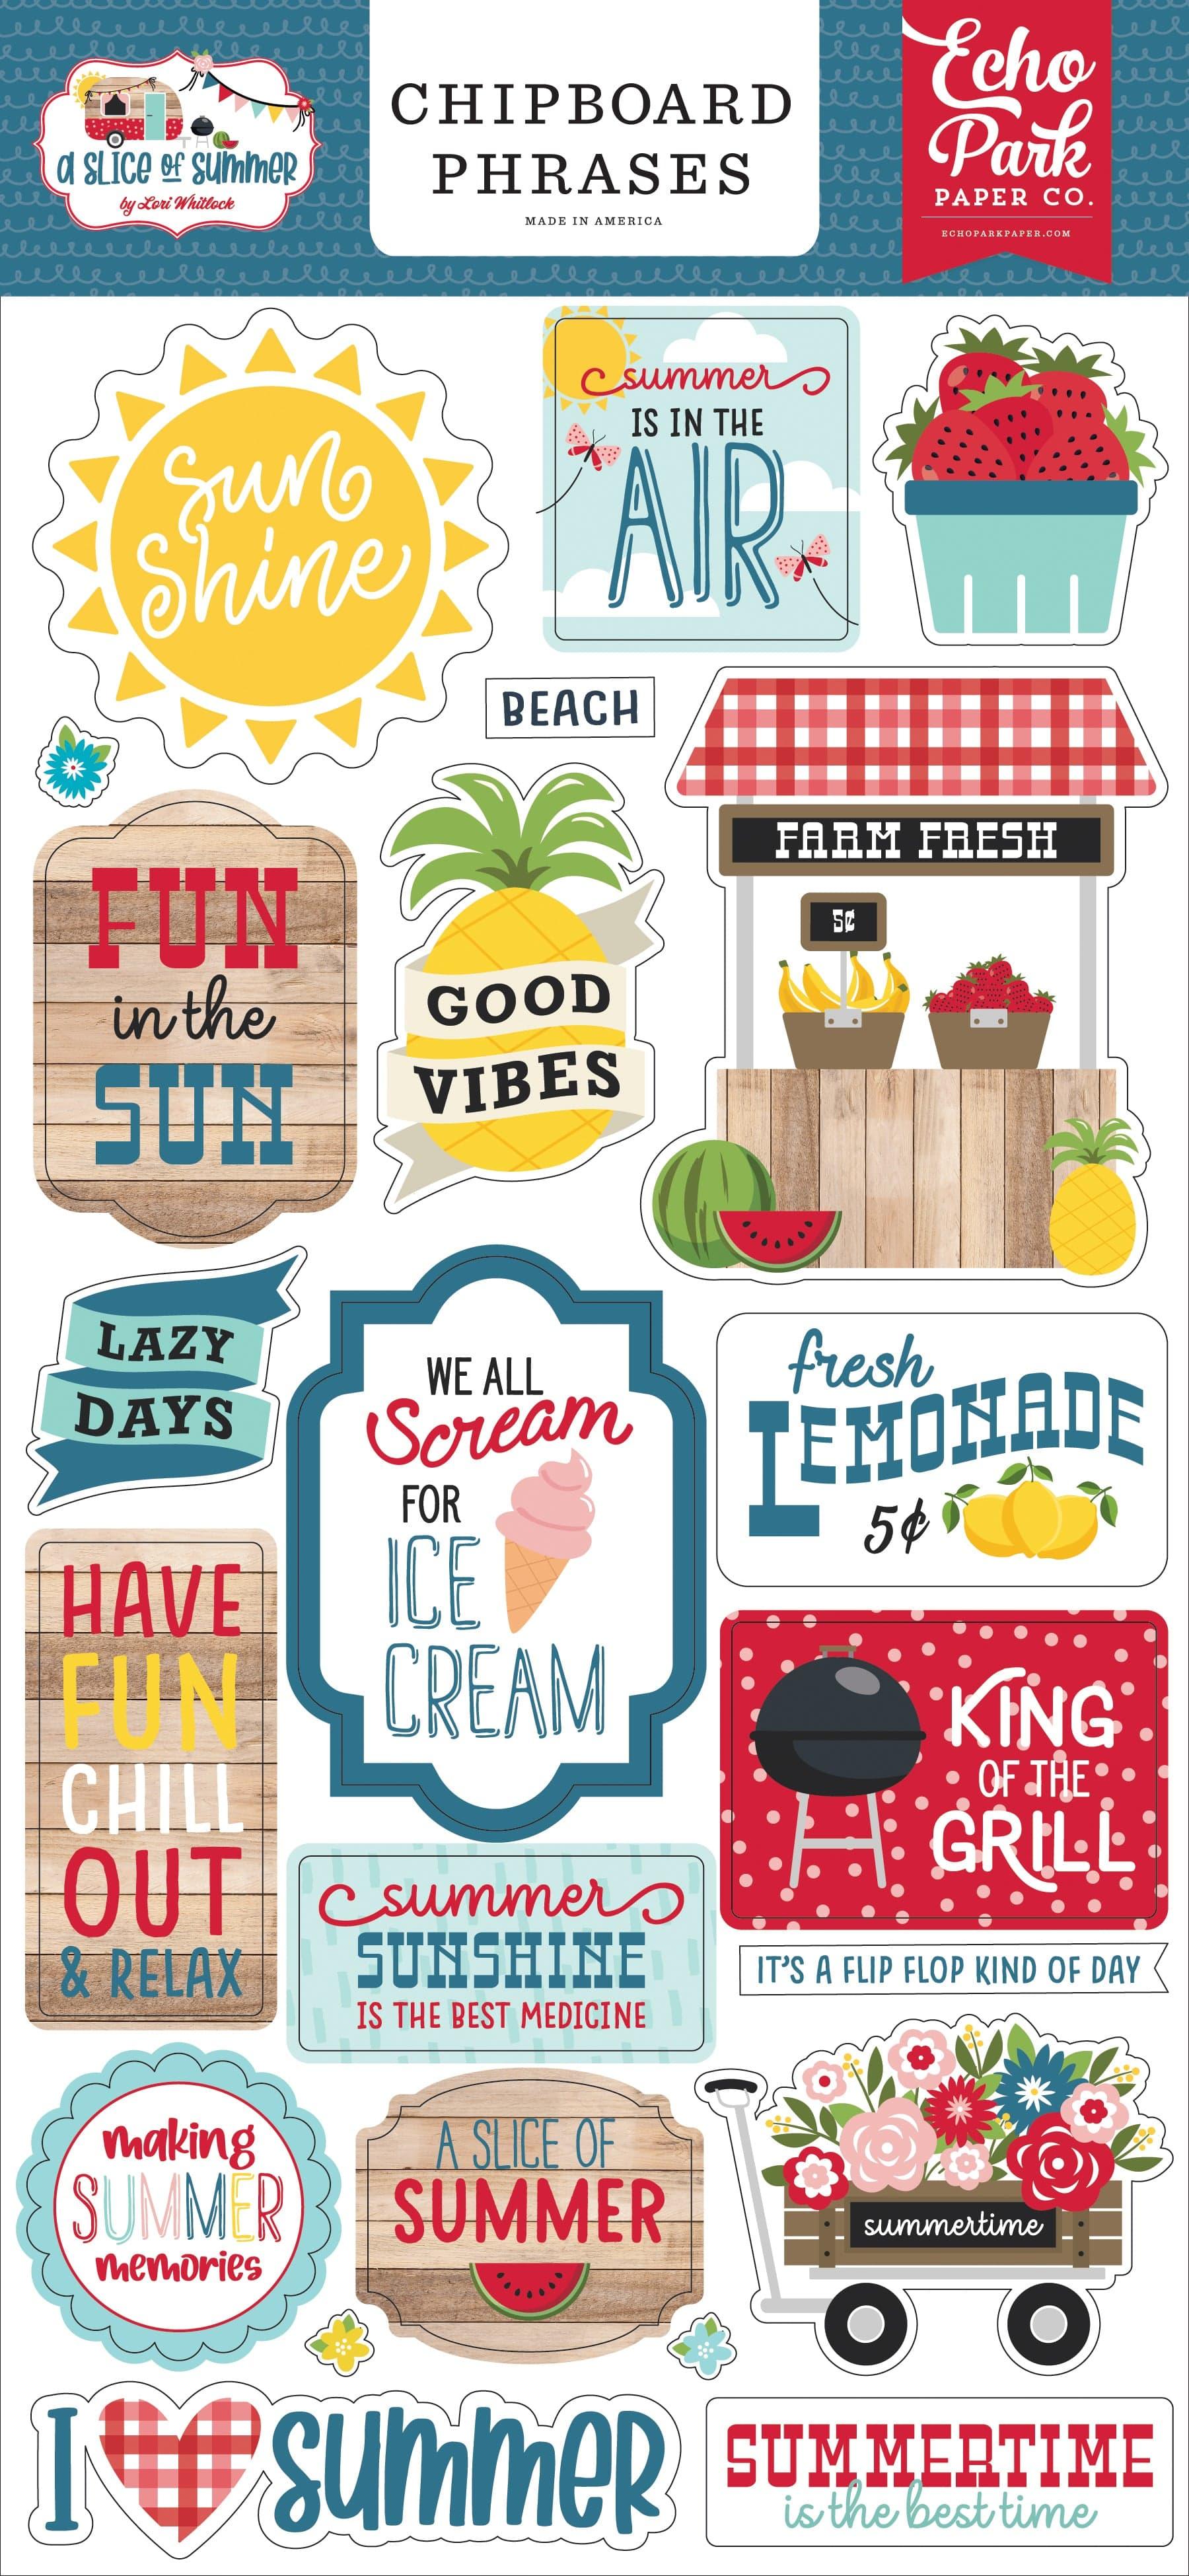 Slice of Summer Collection 6 x 12 Chipboard Phrases Scrapbook Embellishments by Echo Park Paper - Scrapbook Supply Companies